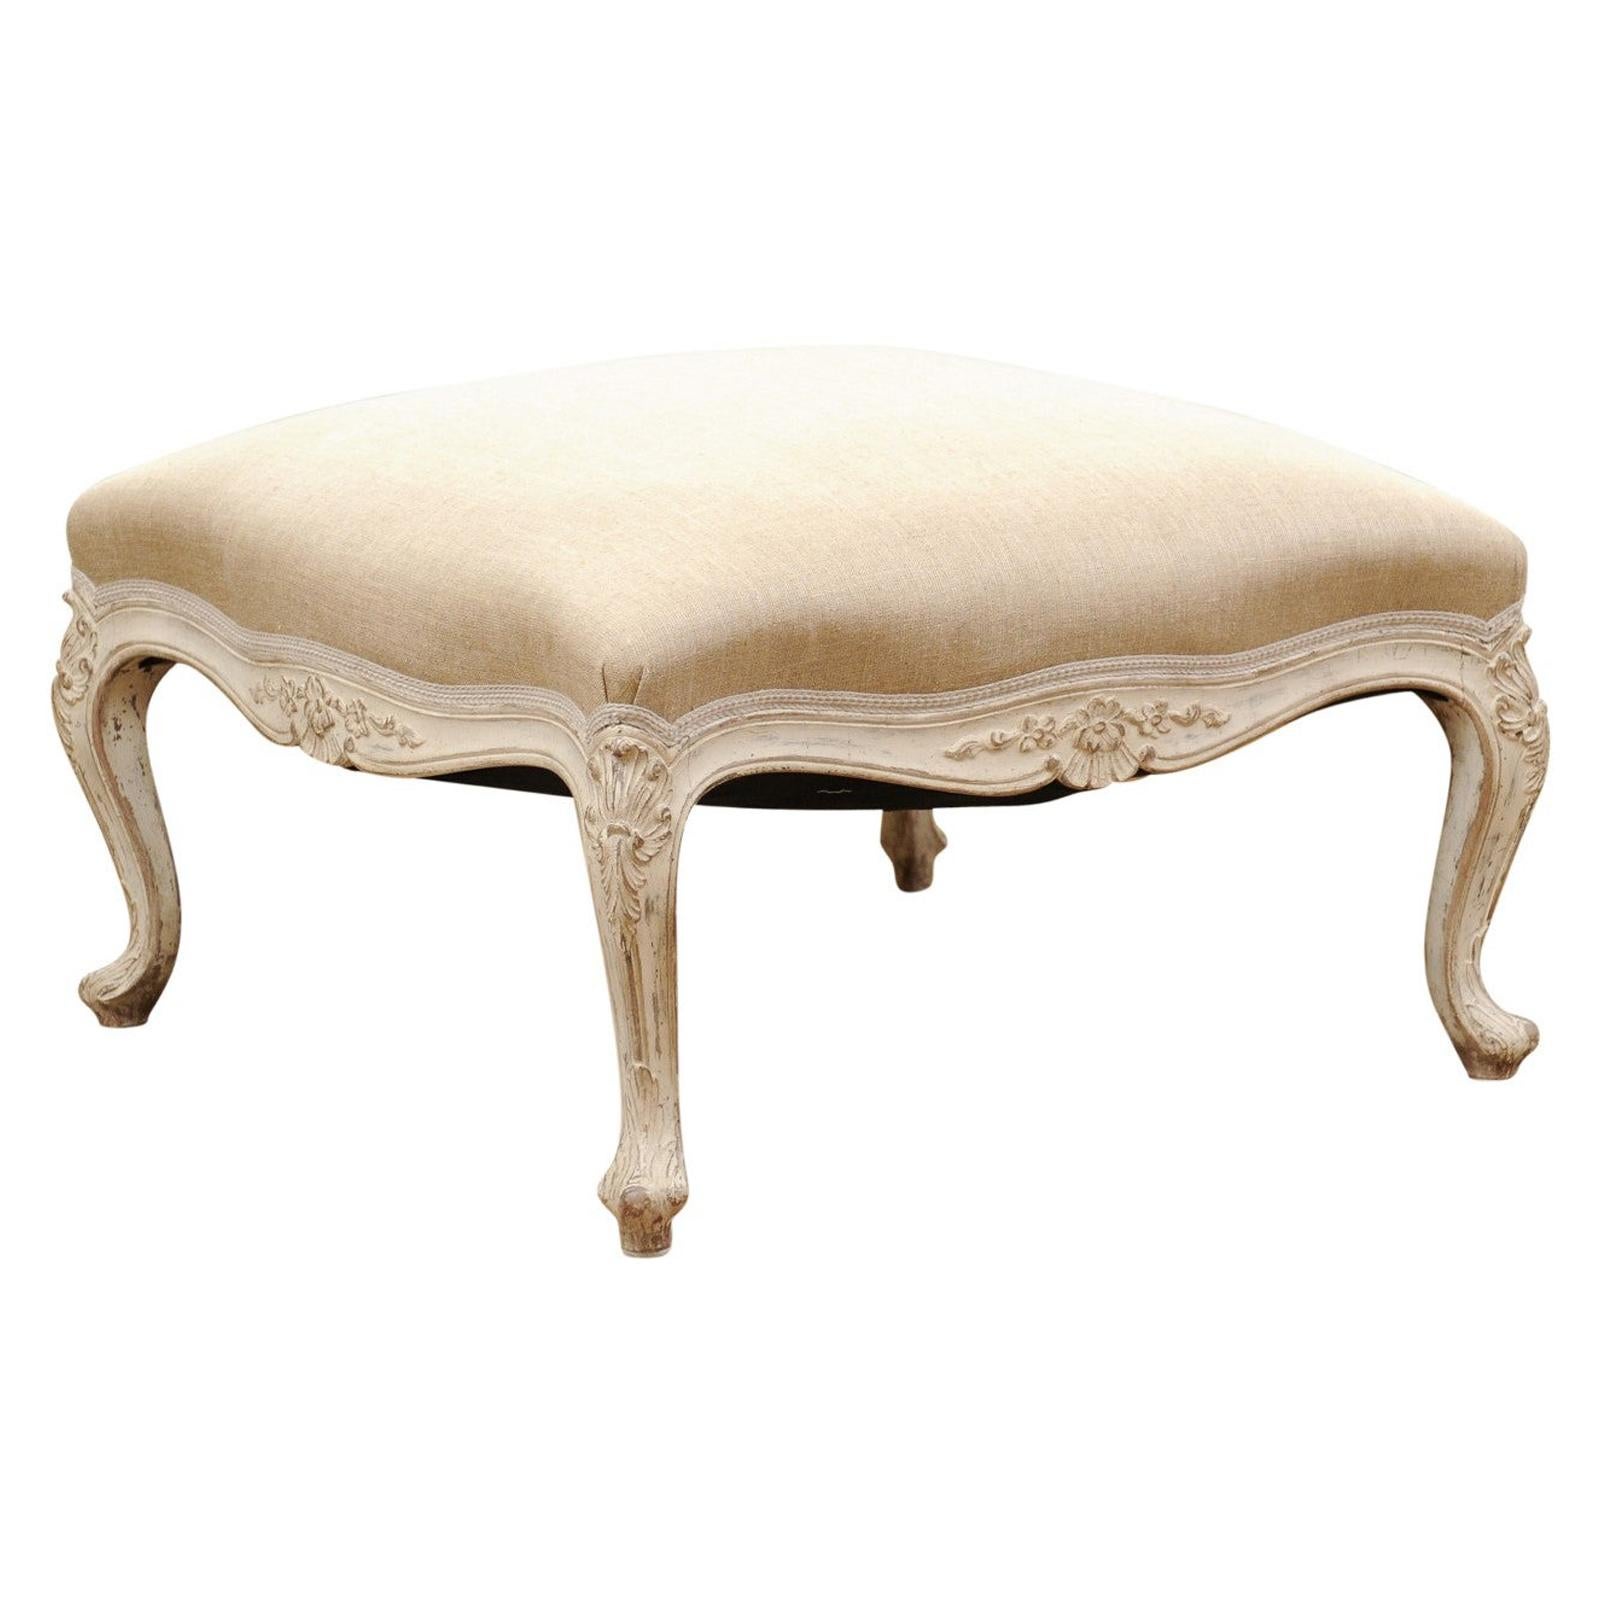 Swedish 19th Century Rococo Style Painted Upholstered Stool with Carved Shells For Sale